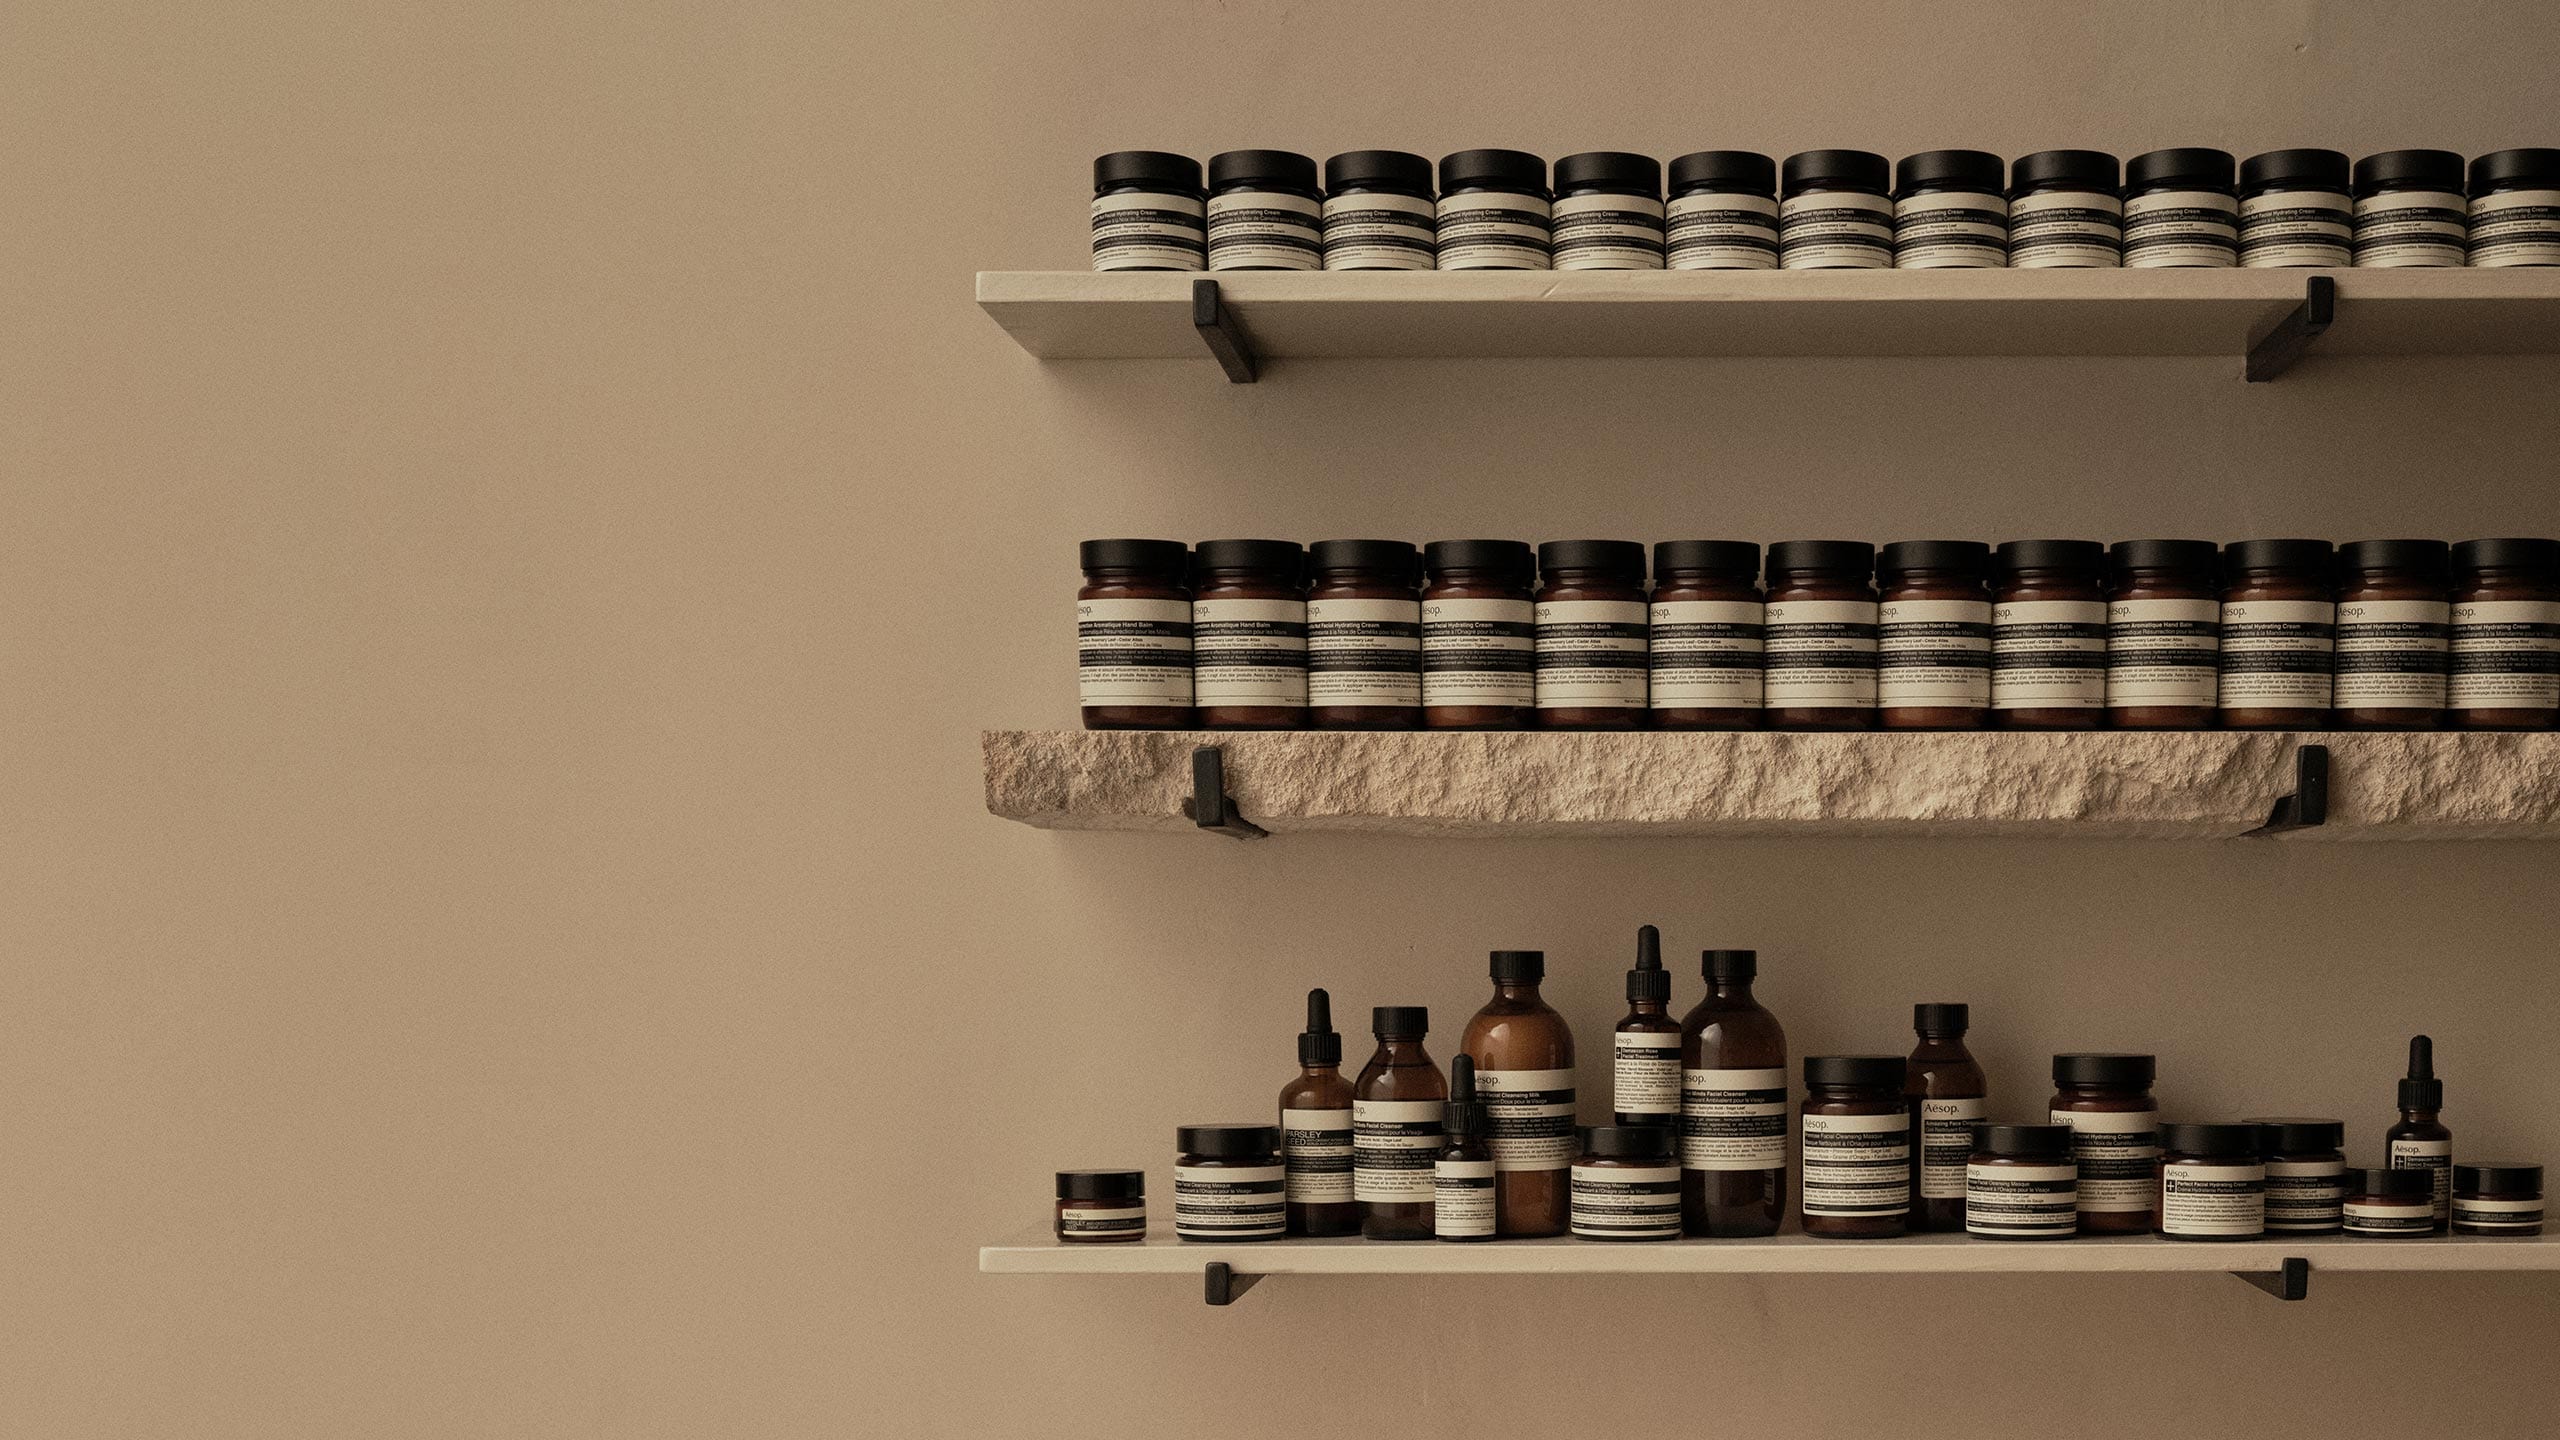 A sink and shelving made of stone, adorned with Aesop bottles and jars.